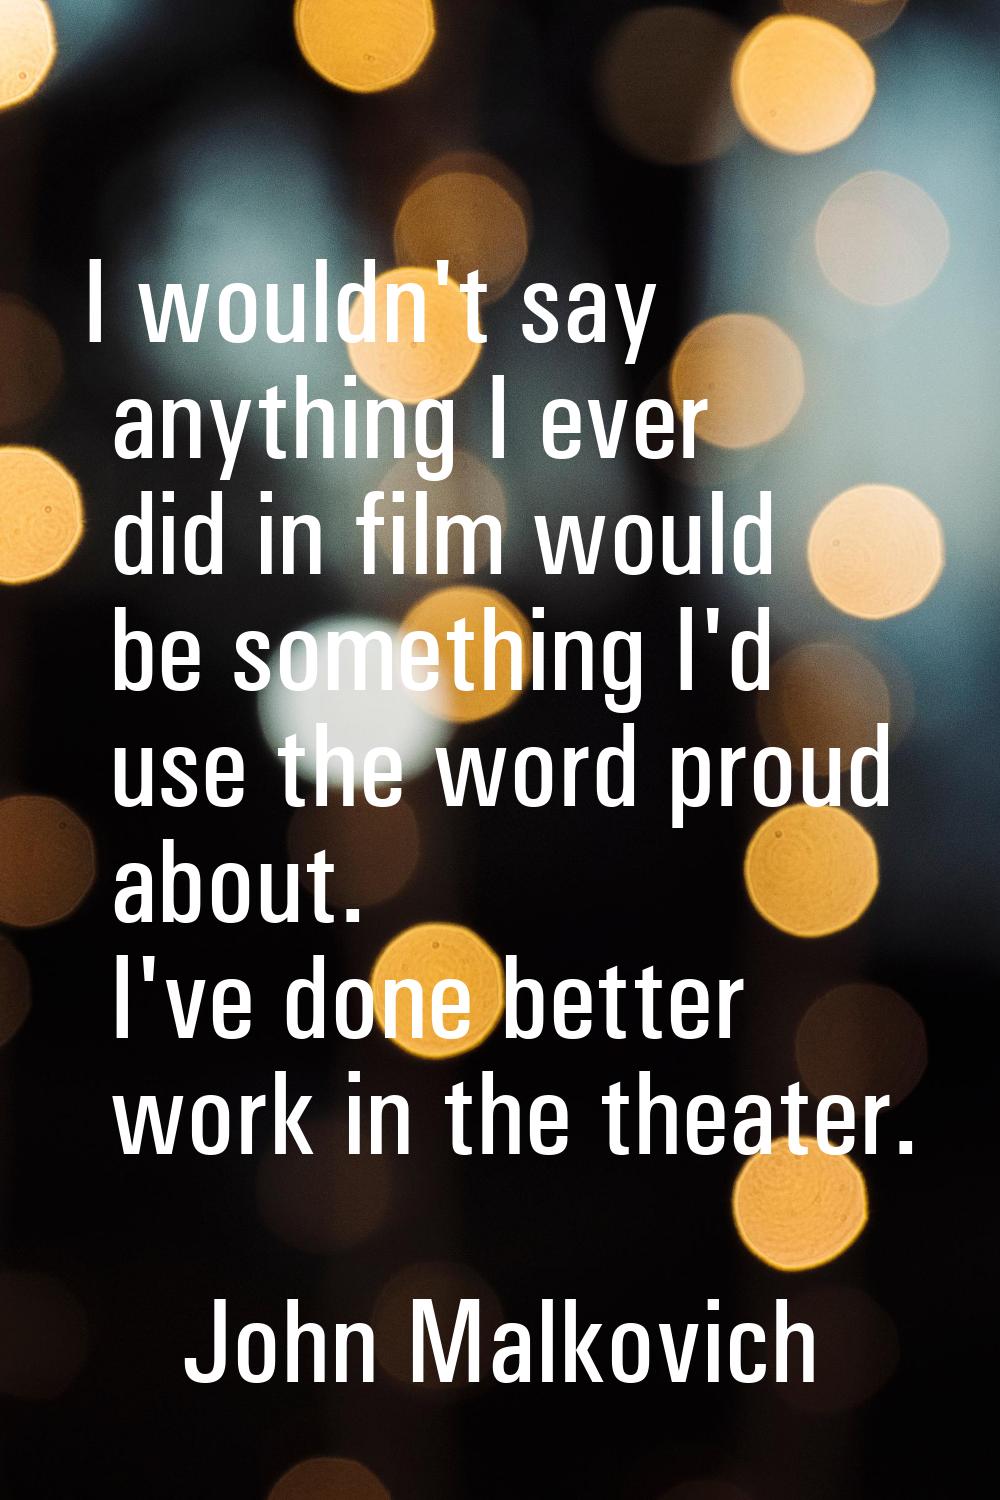 I wouldn't say anything I ever did in film would be something I'd use the word proud about. I've do